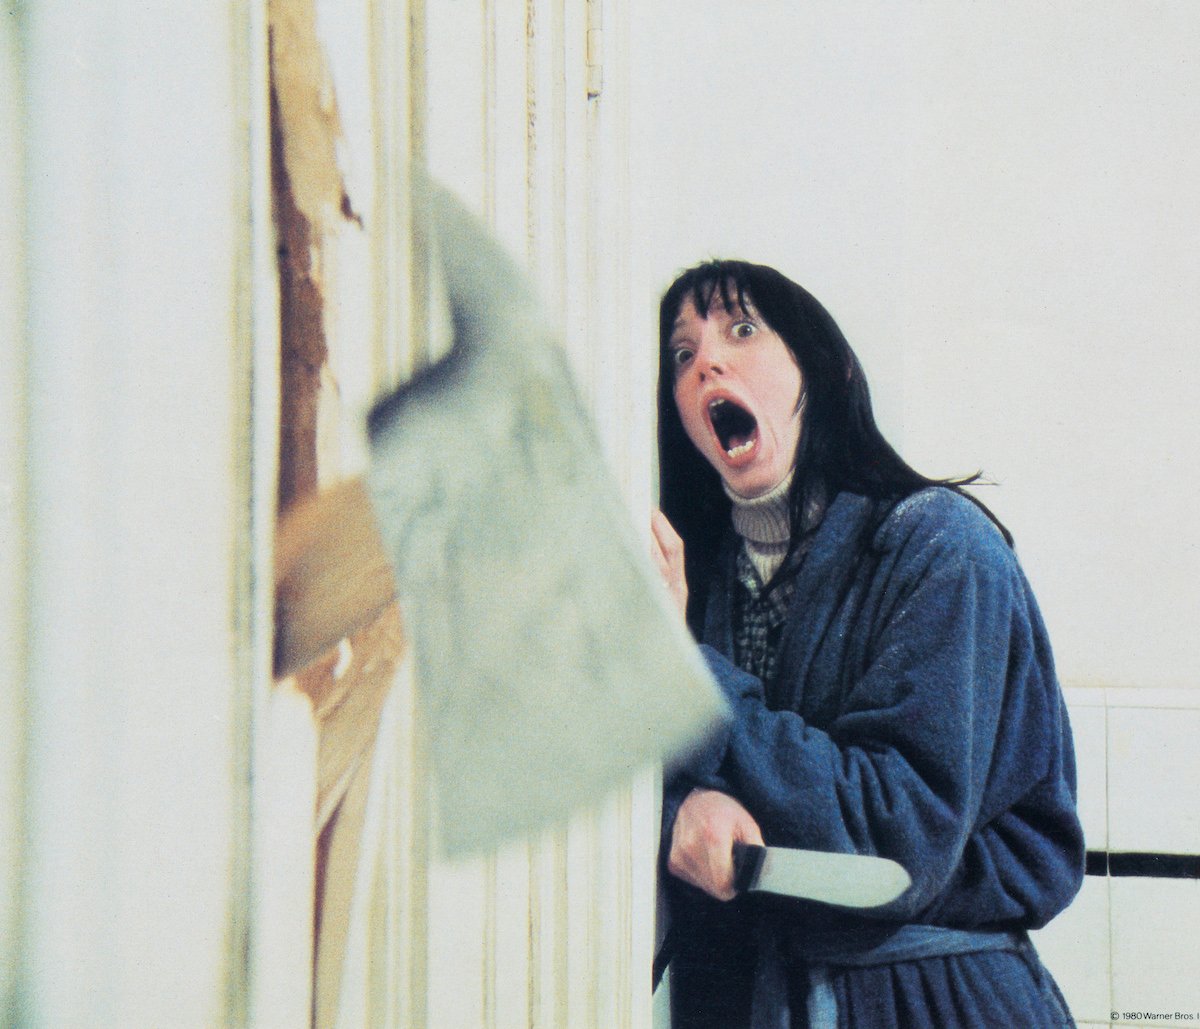 Shelley Duvall on the set of 'The Shining'